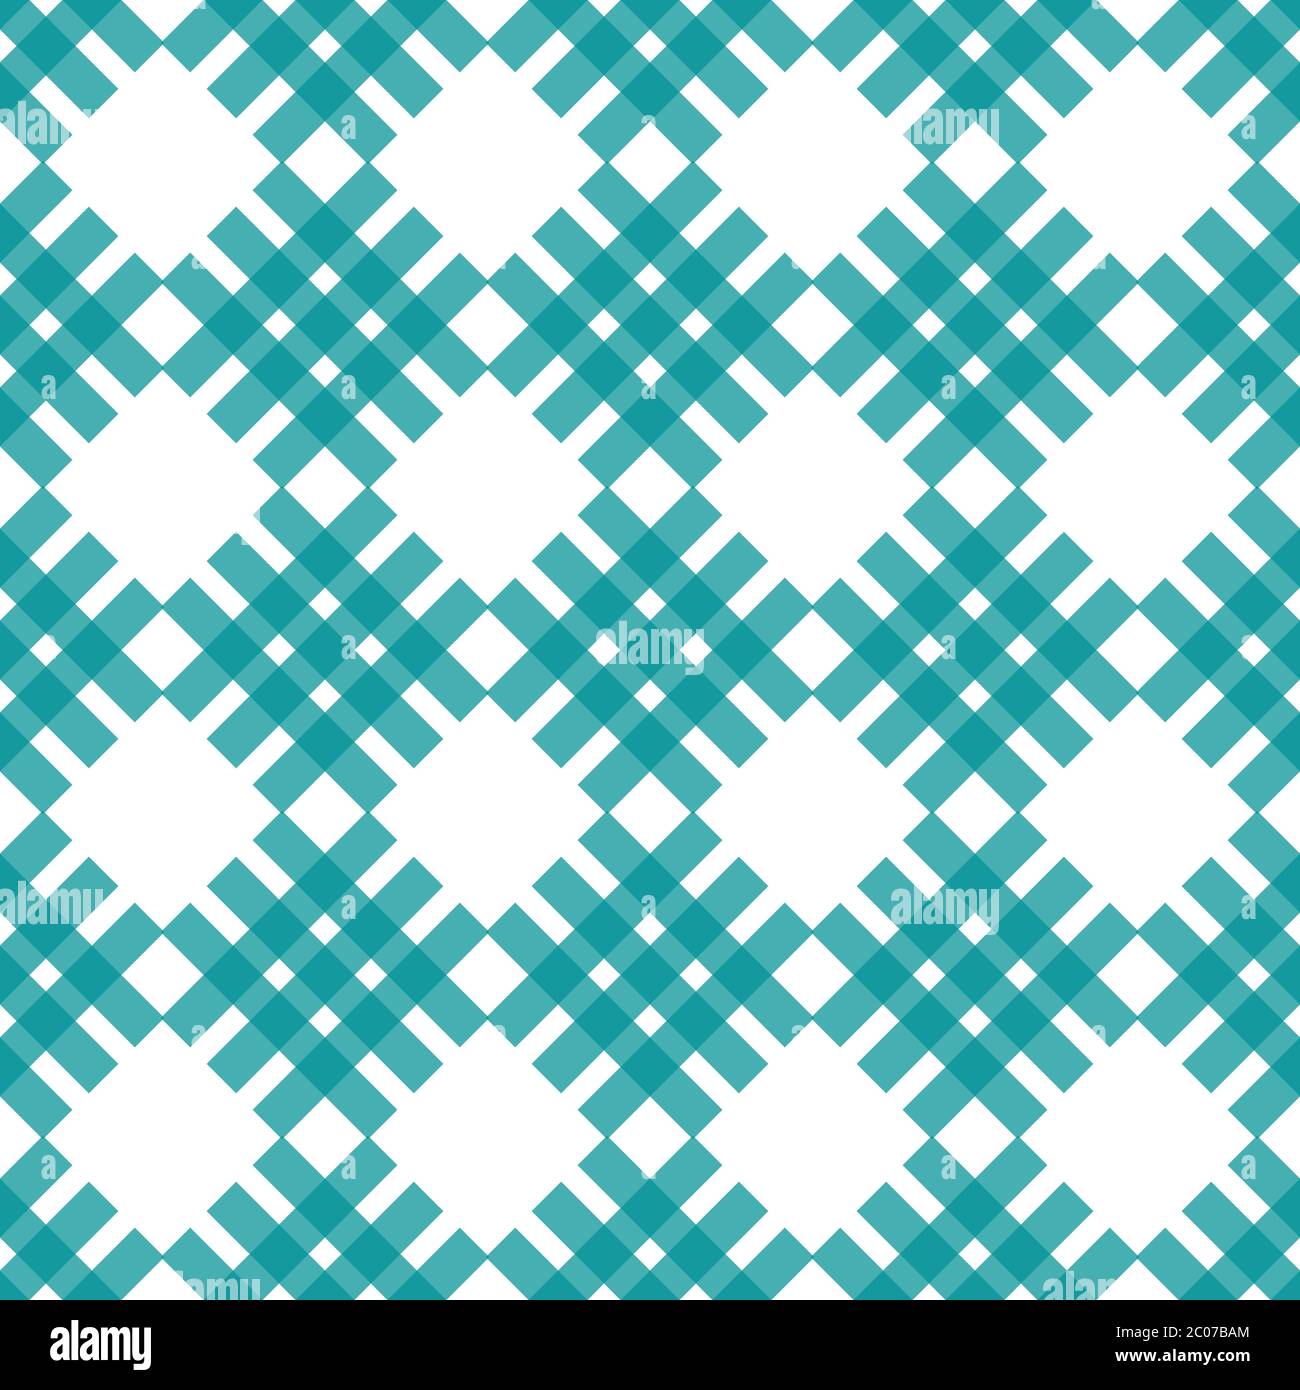 Tartan Seamless Pattern Background. Black, Green and White Plaid, Tartan Flannel Shirt Patterns. Trendy Tiles Vector Illustration for Wallpapers Stock Vector